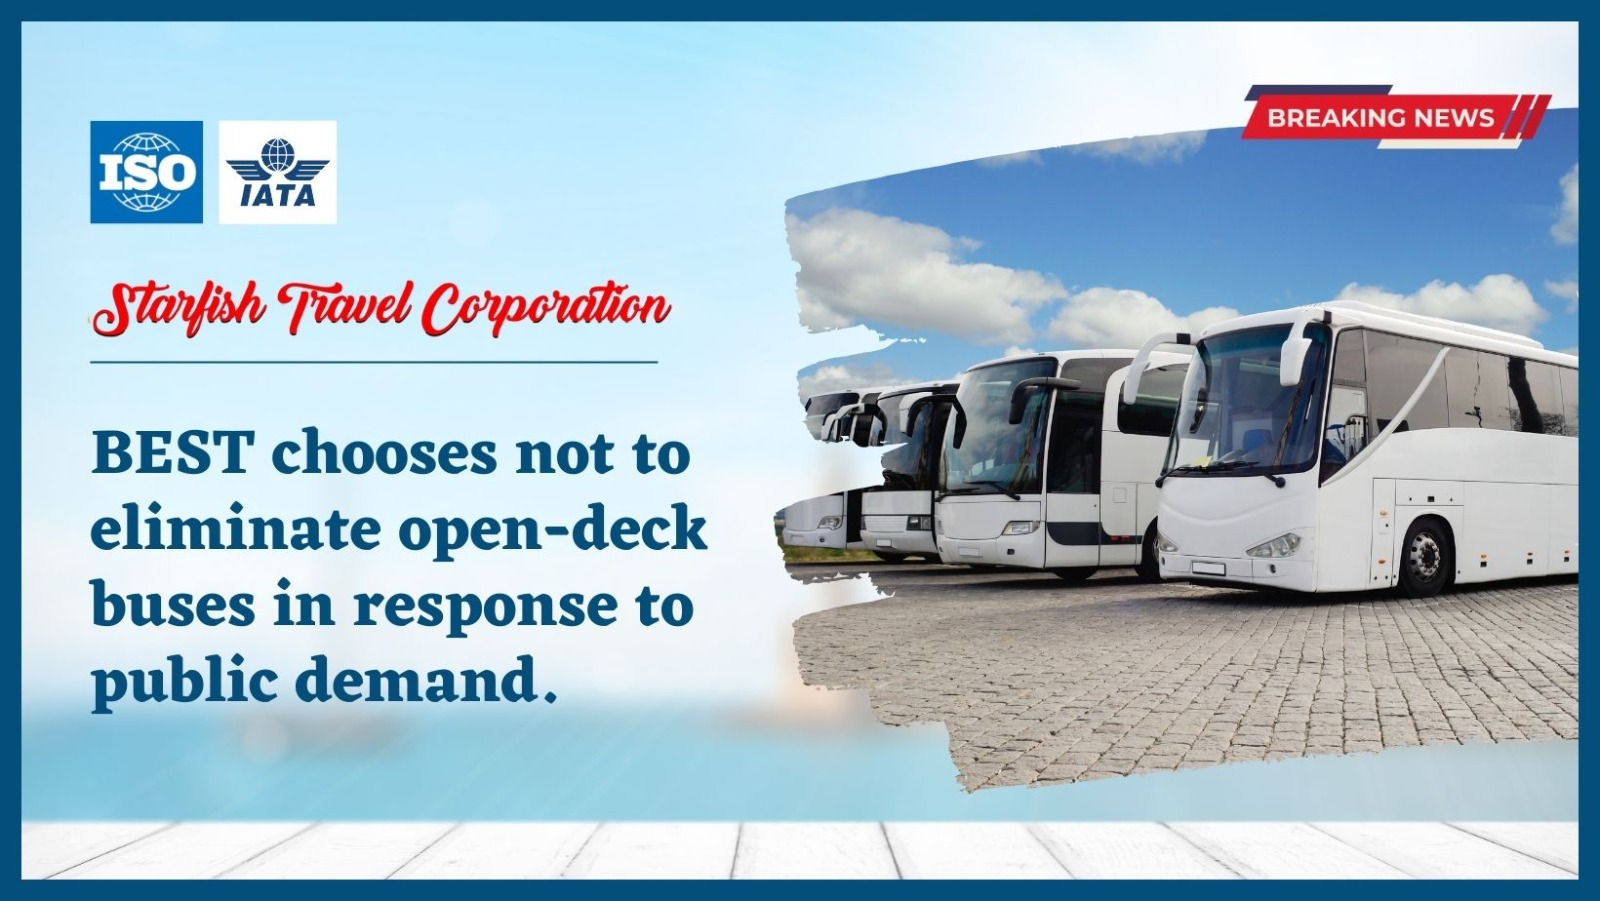 BEST chooses not to eliminate open-deck buses in response to public demand.